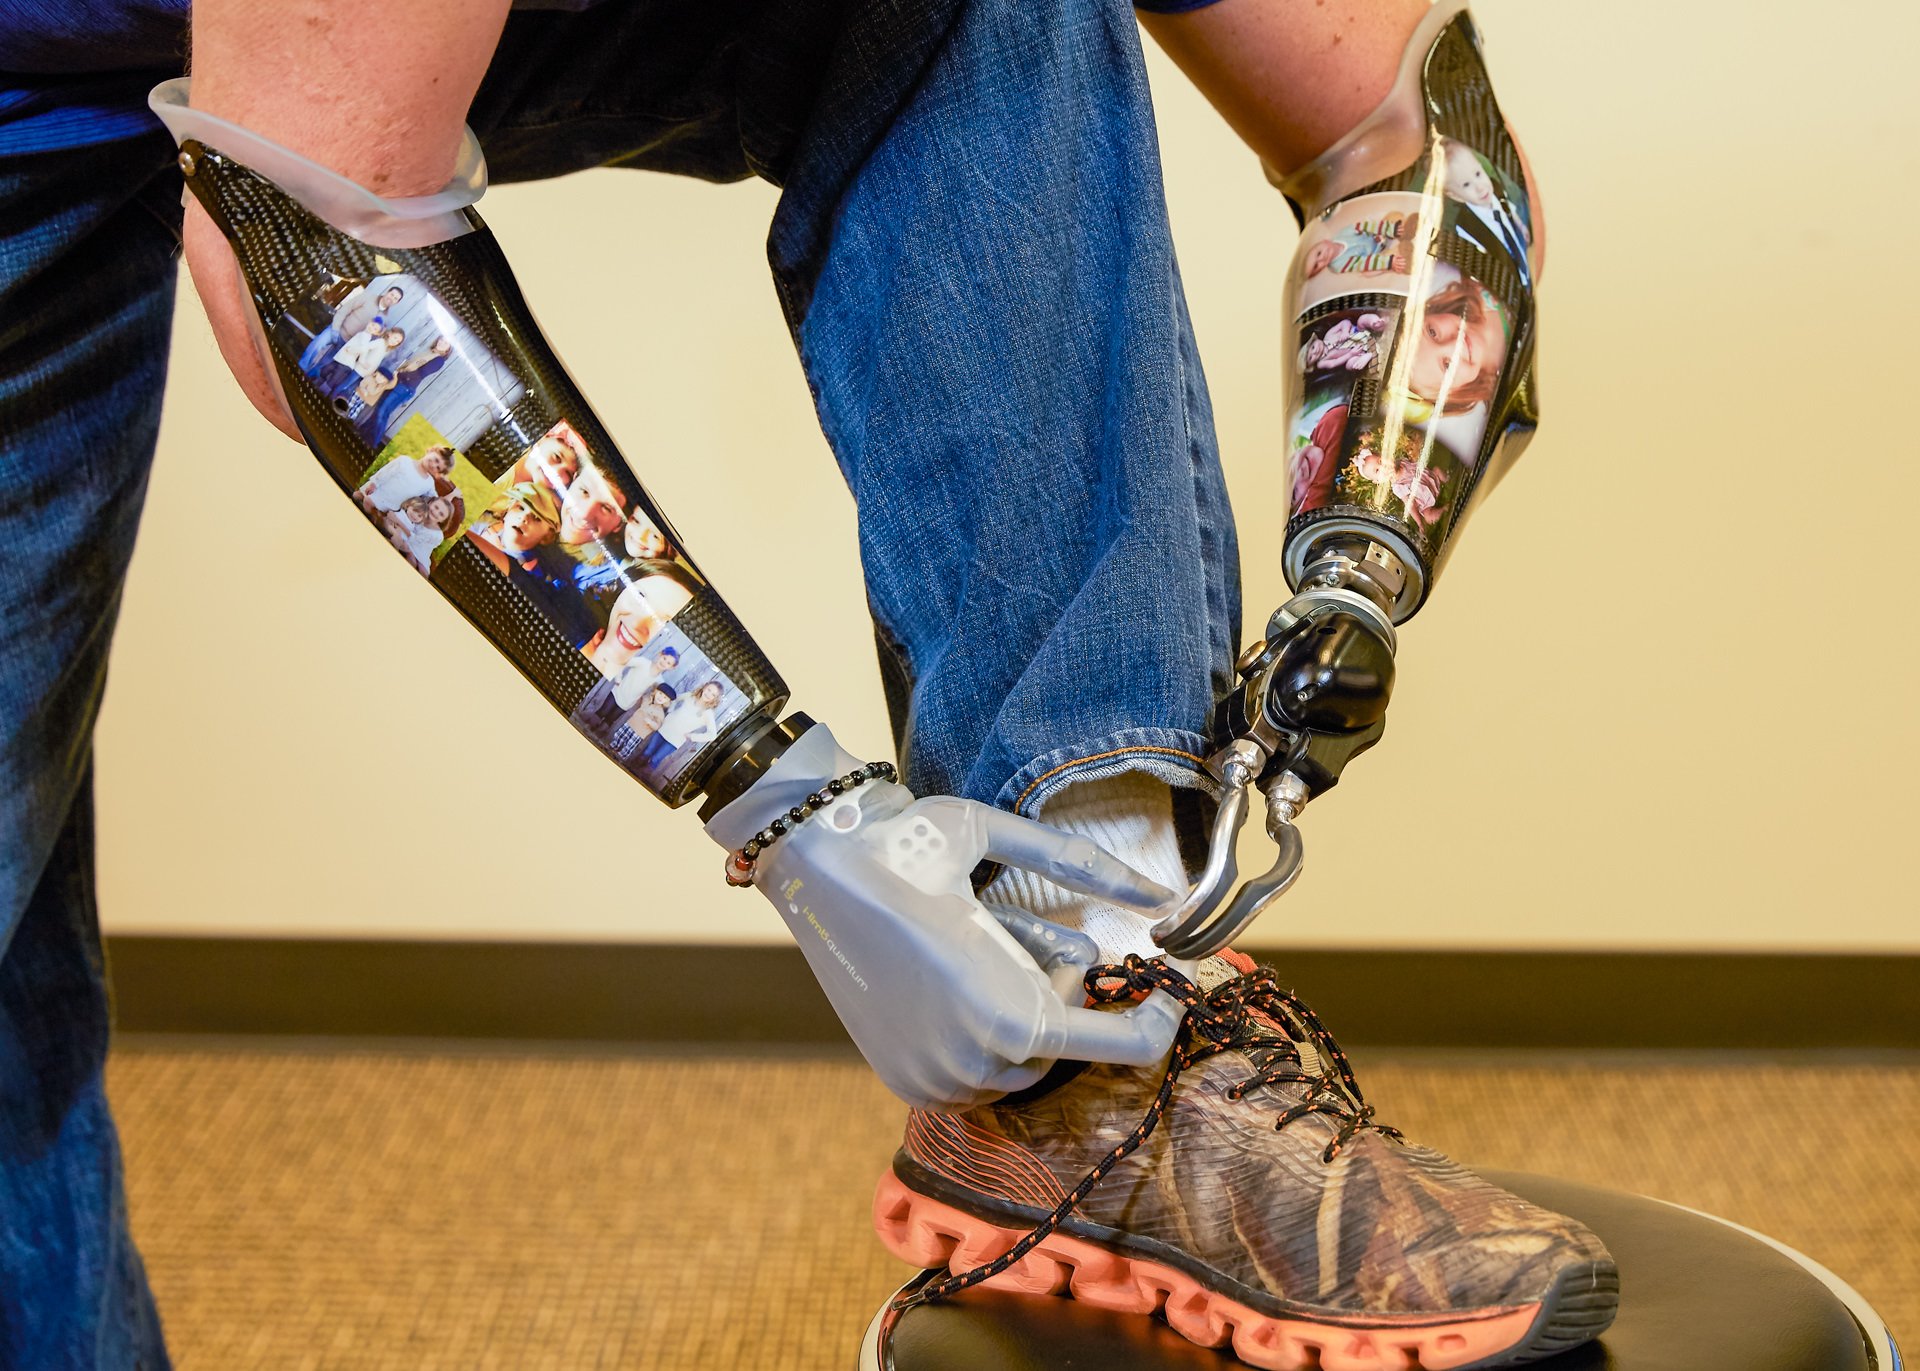 Jason Koger, a bilateral transradial patient, uses an ETD and his i-limb prosthesis to tie his shoes.